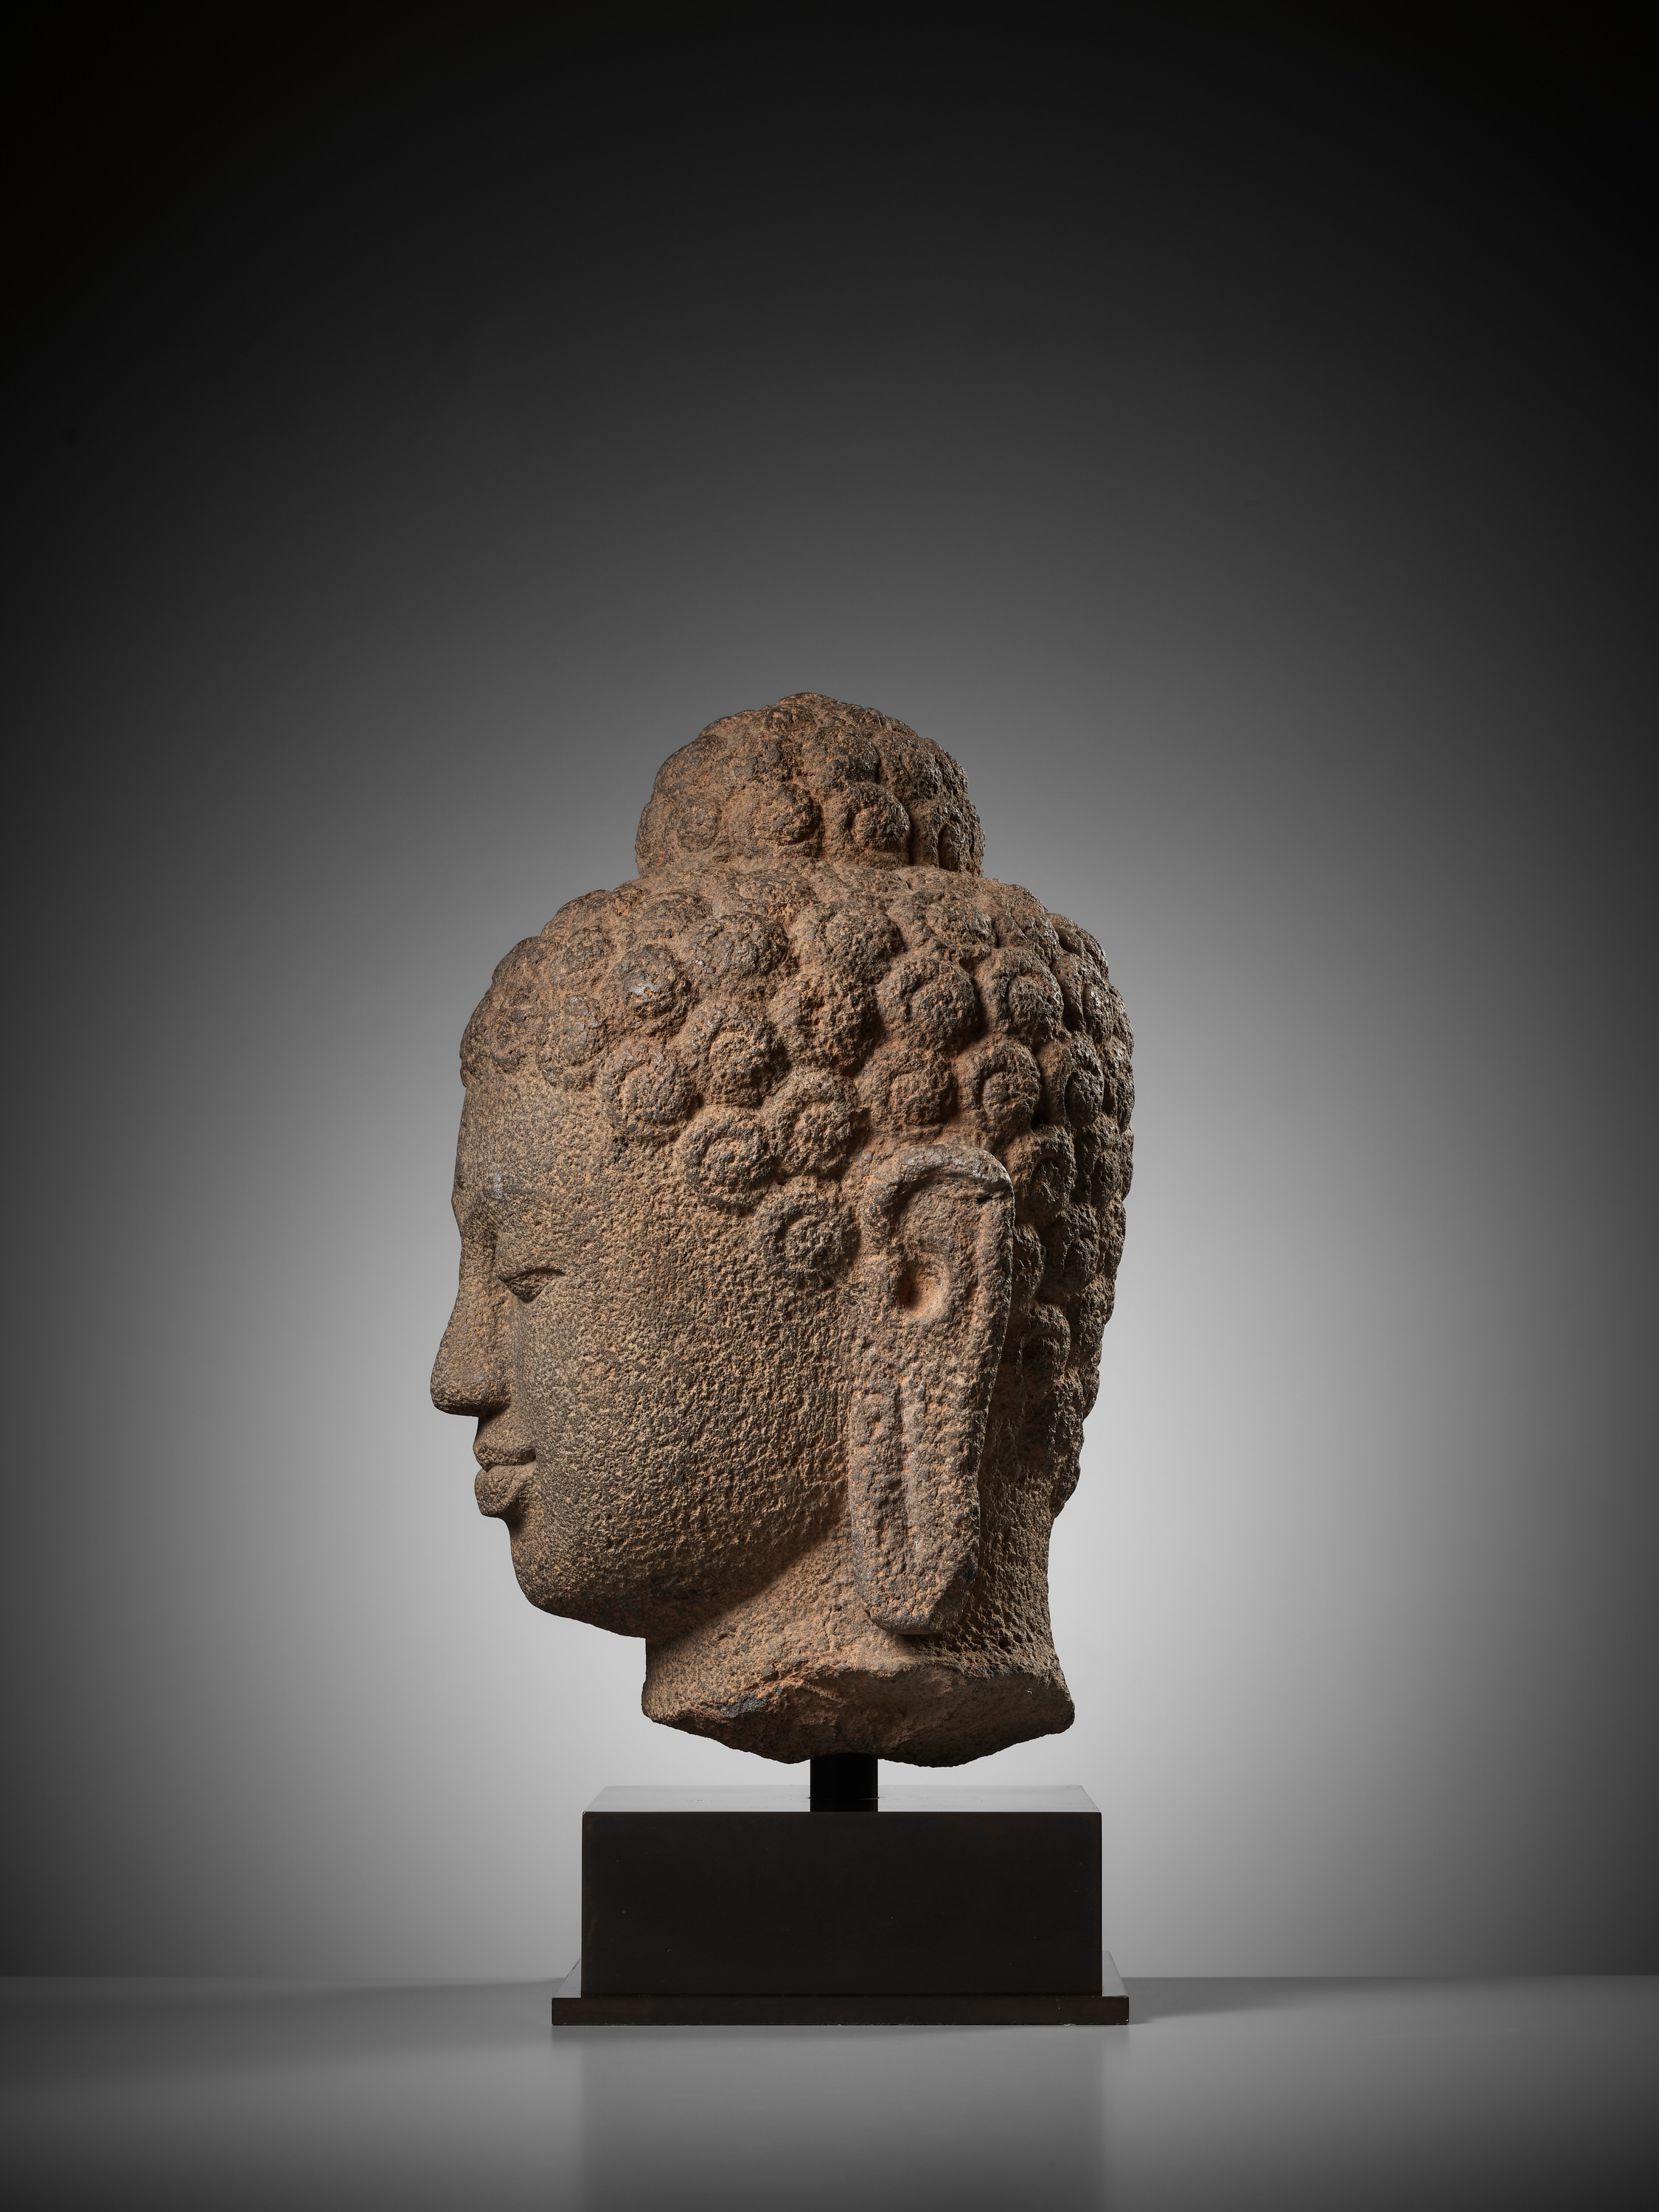 A LARGE ANDESITE HEAD OF BUDDHA, INDONESIA, CENTRAL JAVA, 9TH CENTURY - Image 9 of 10